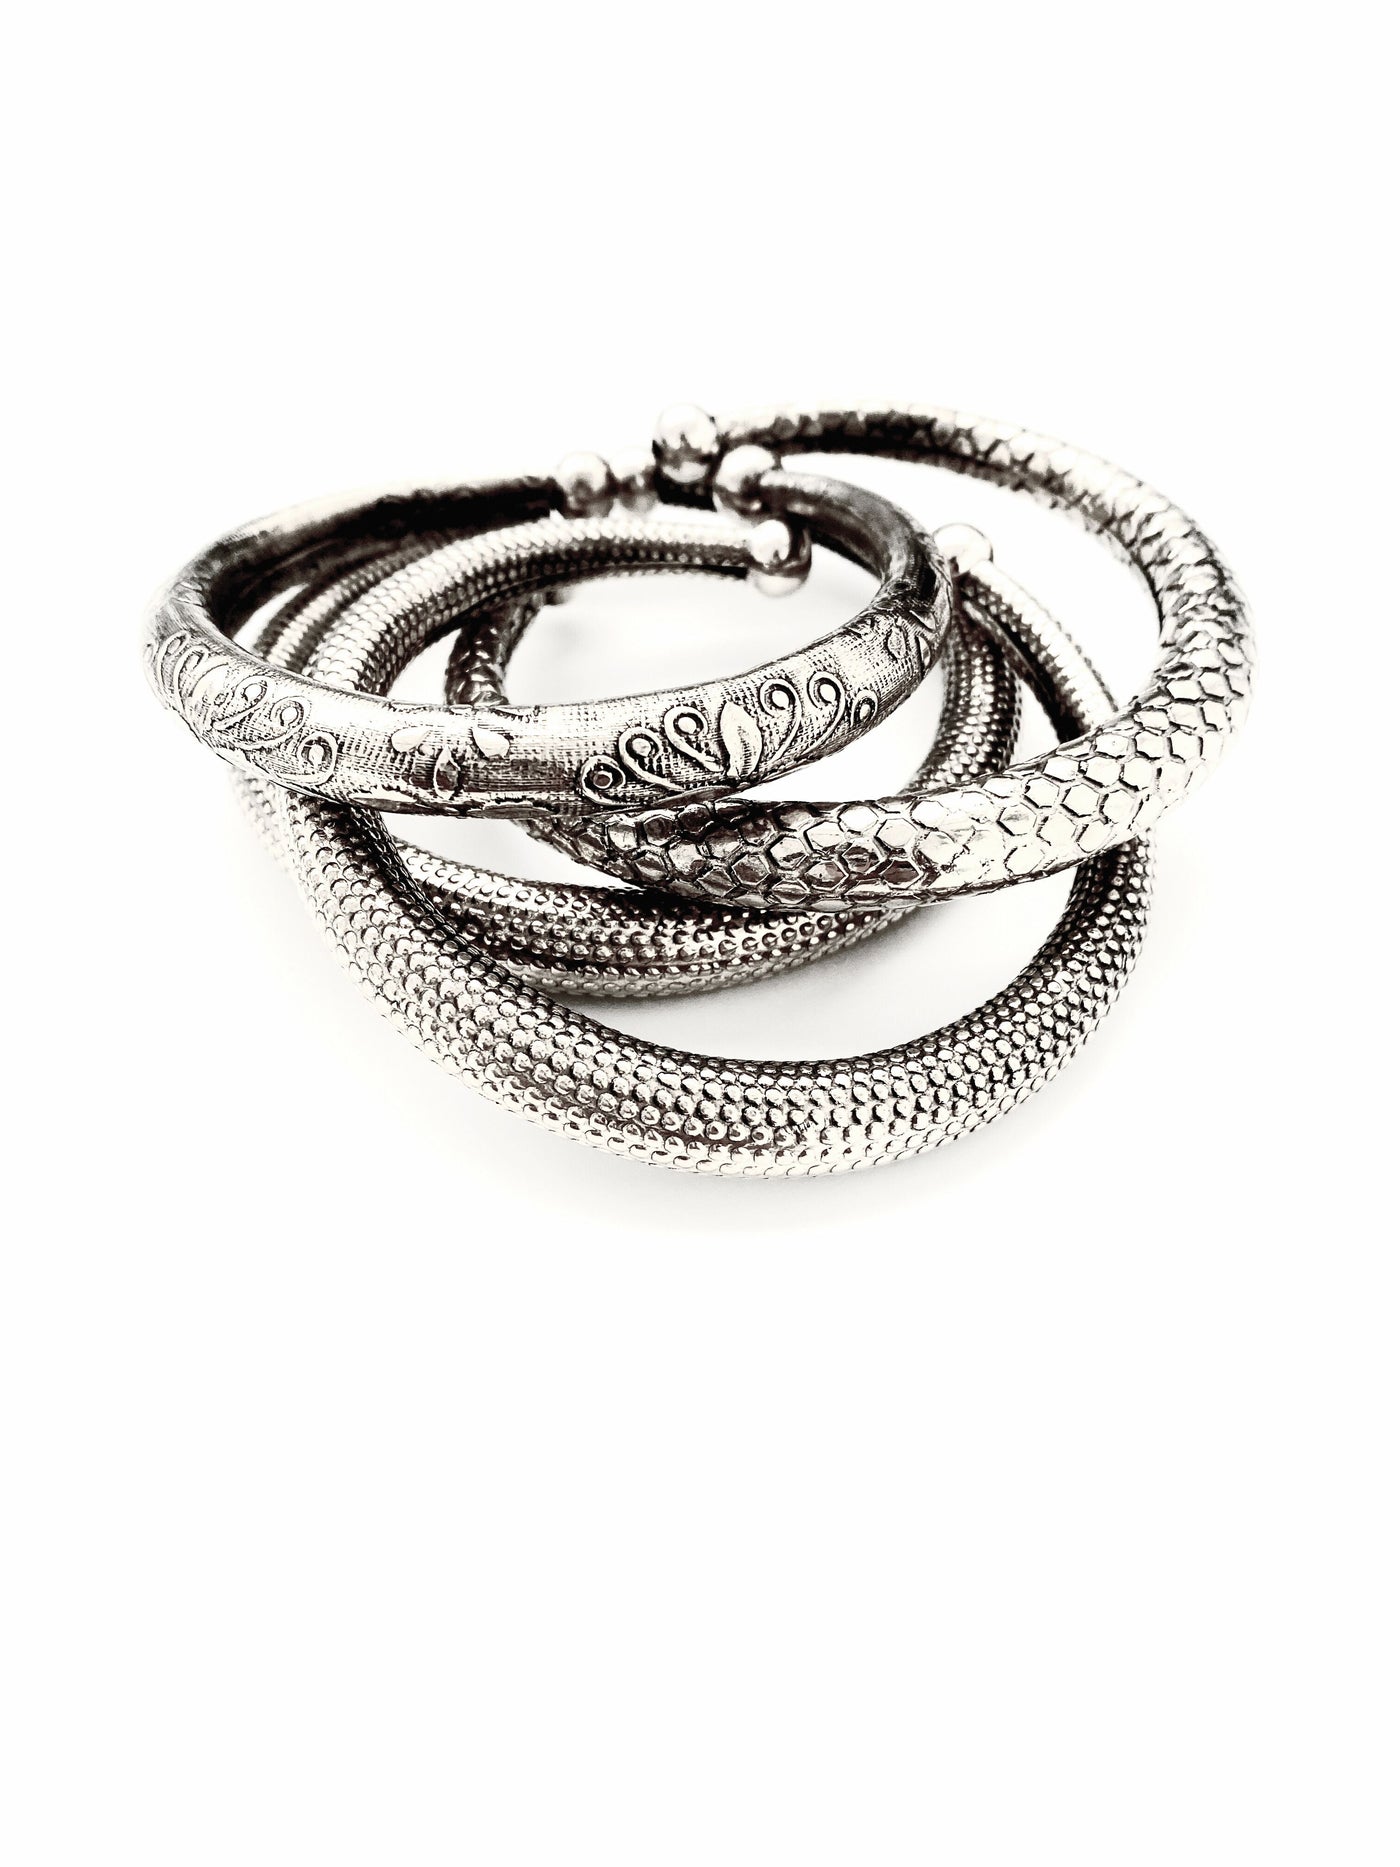 Vintage Etched Silver Cuff